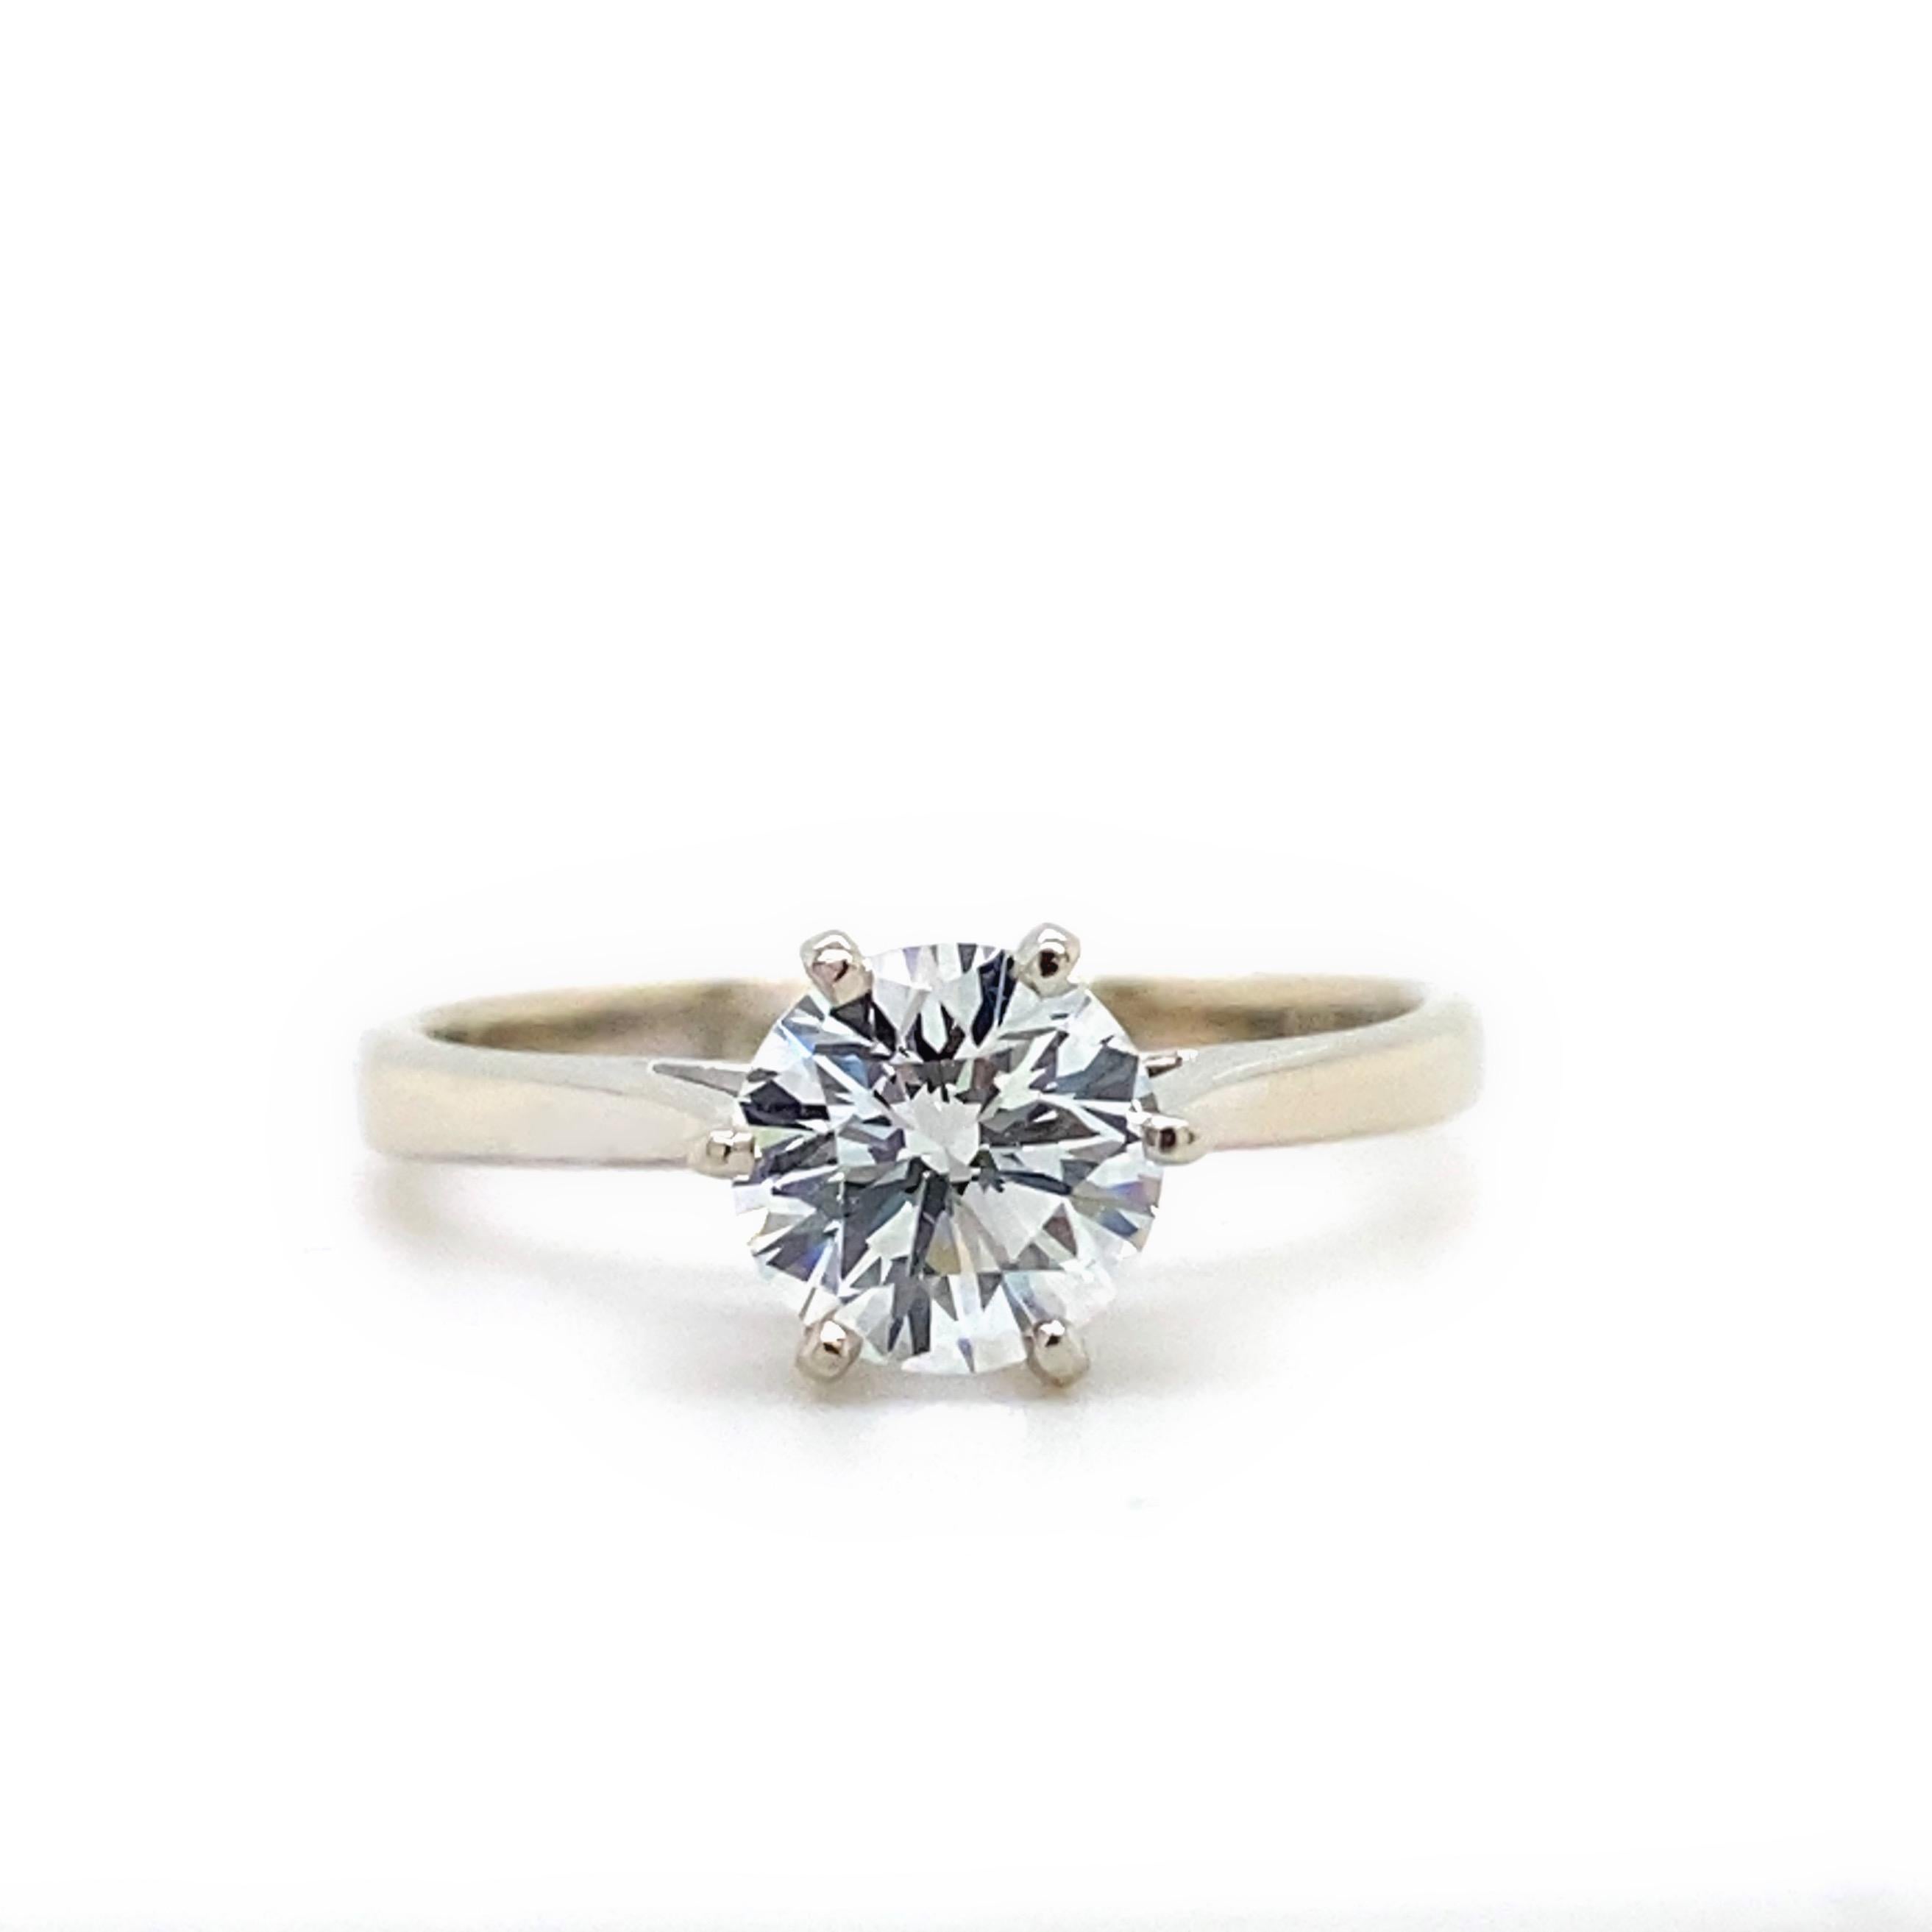 LAZARE KAPLAN Round Brilliant Diamond 1CT F VS1 Engagement Ring in 14kt WG GIA For Sale 1